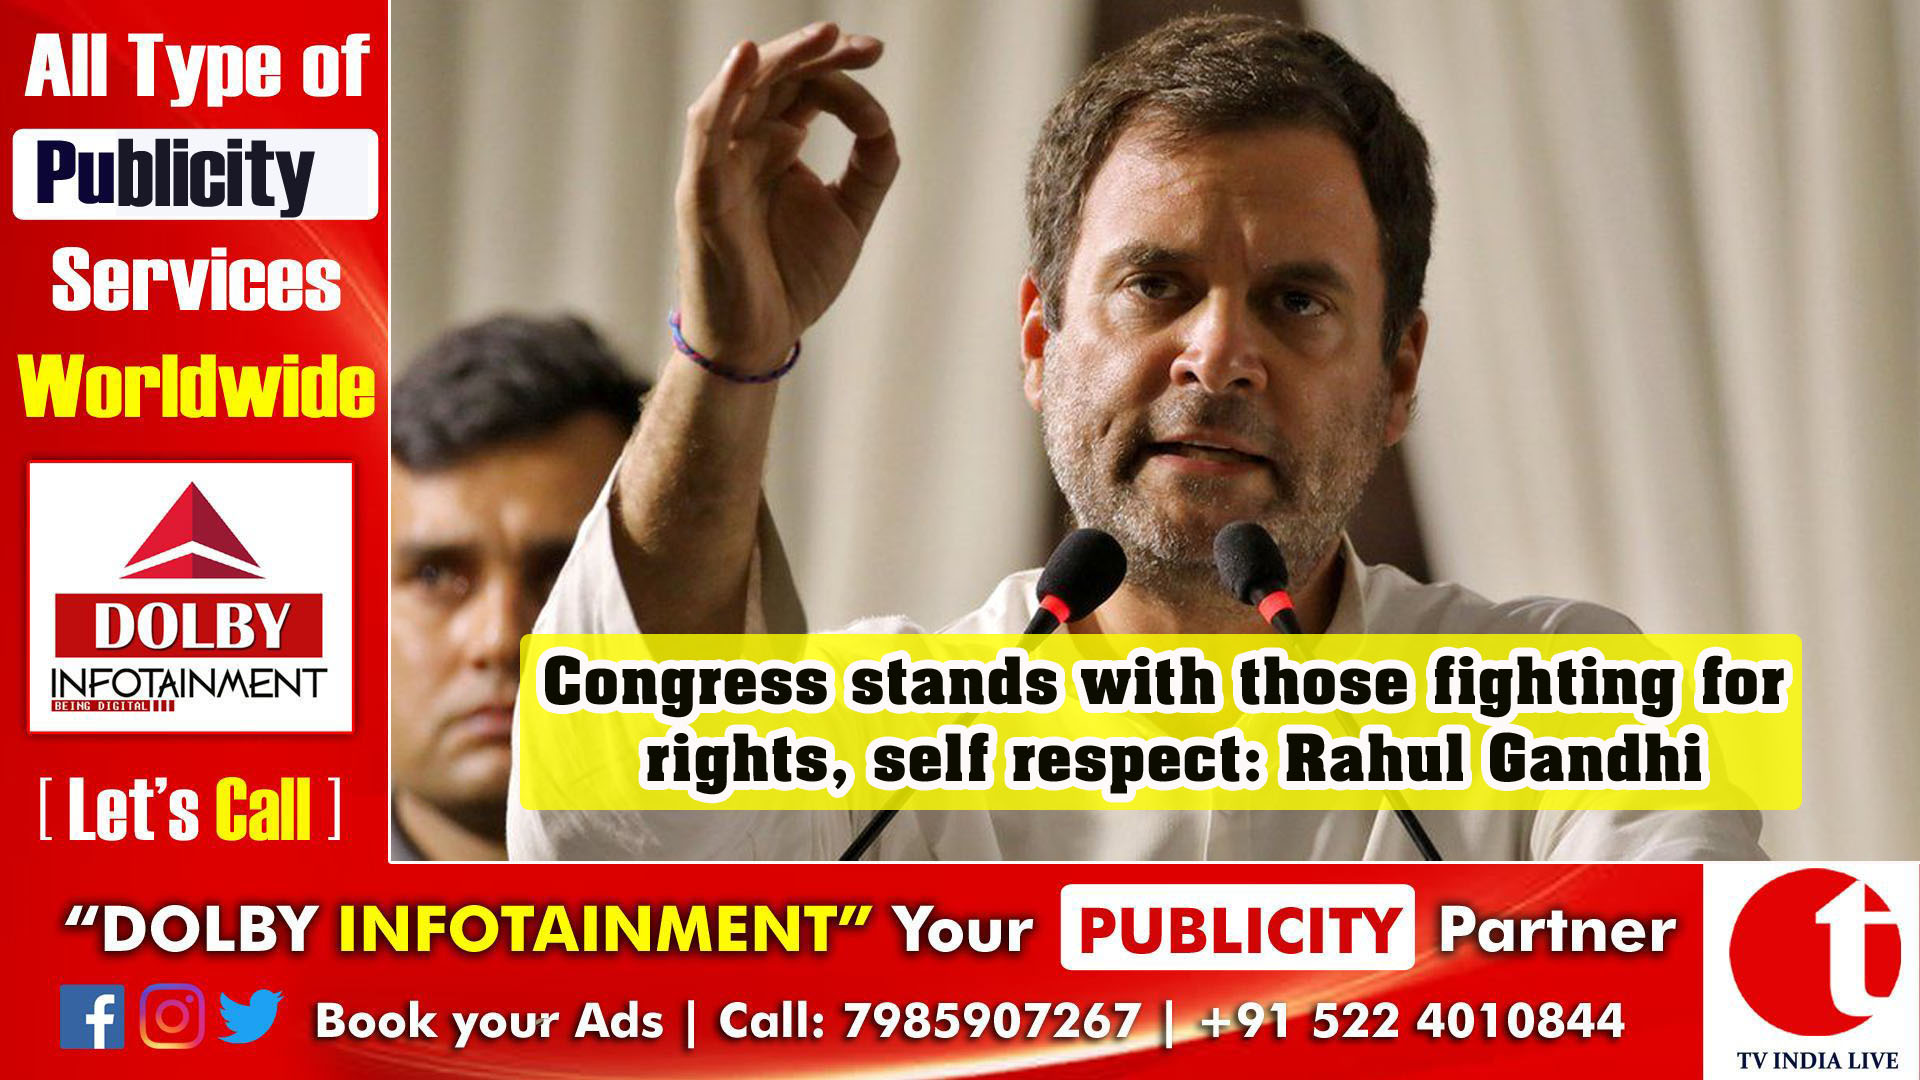 Congress stands with those fighting for rights, self respect: Rahul Gandhi